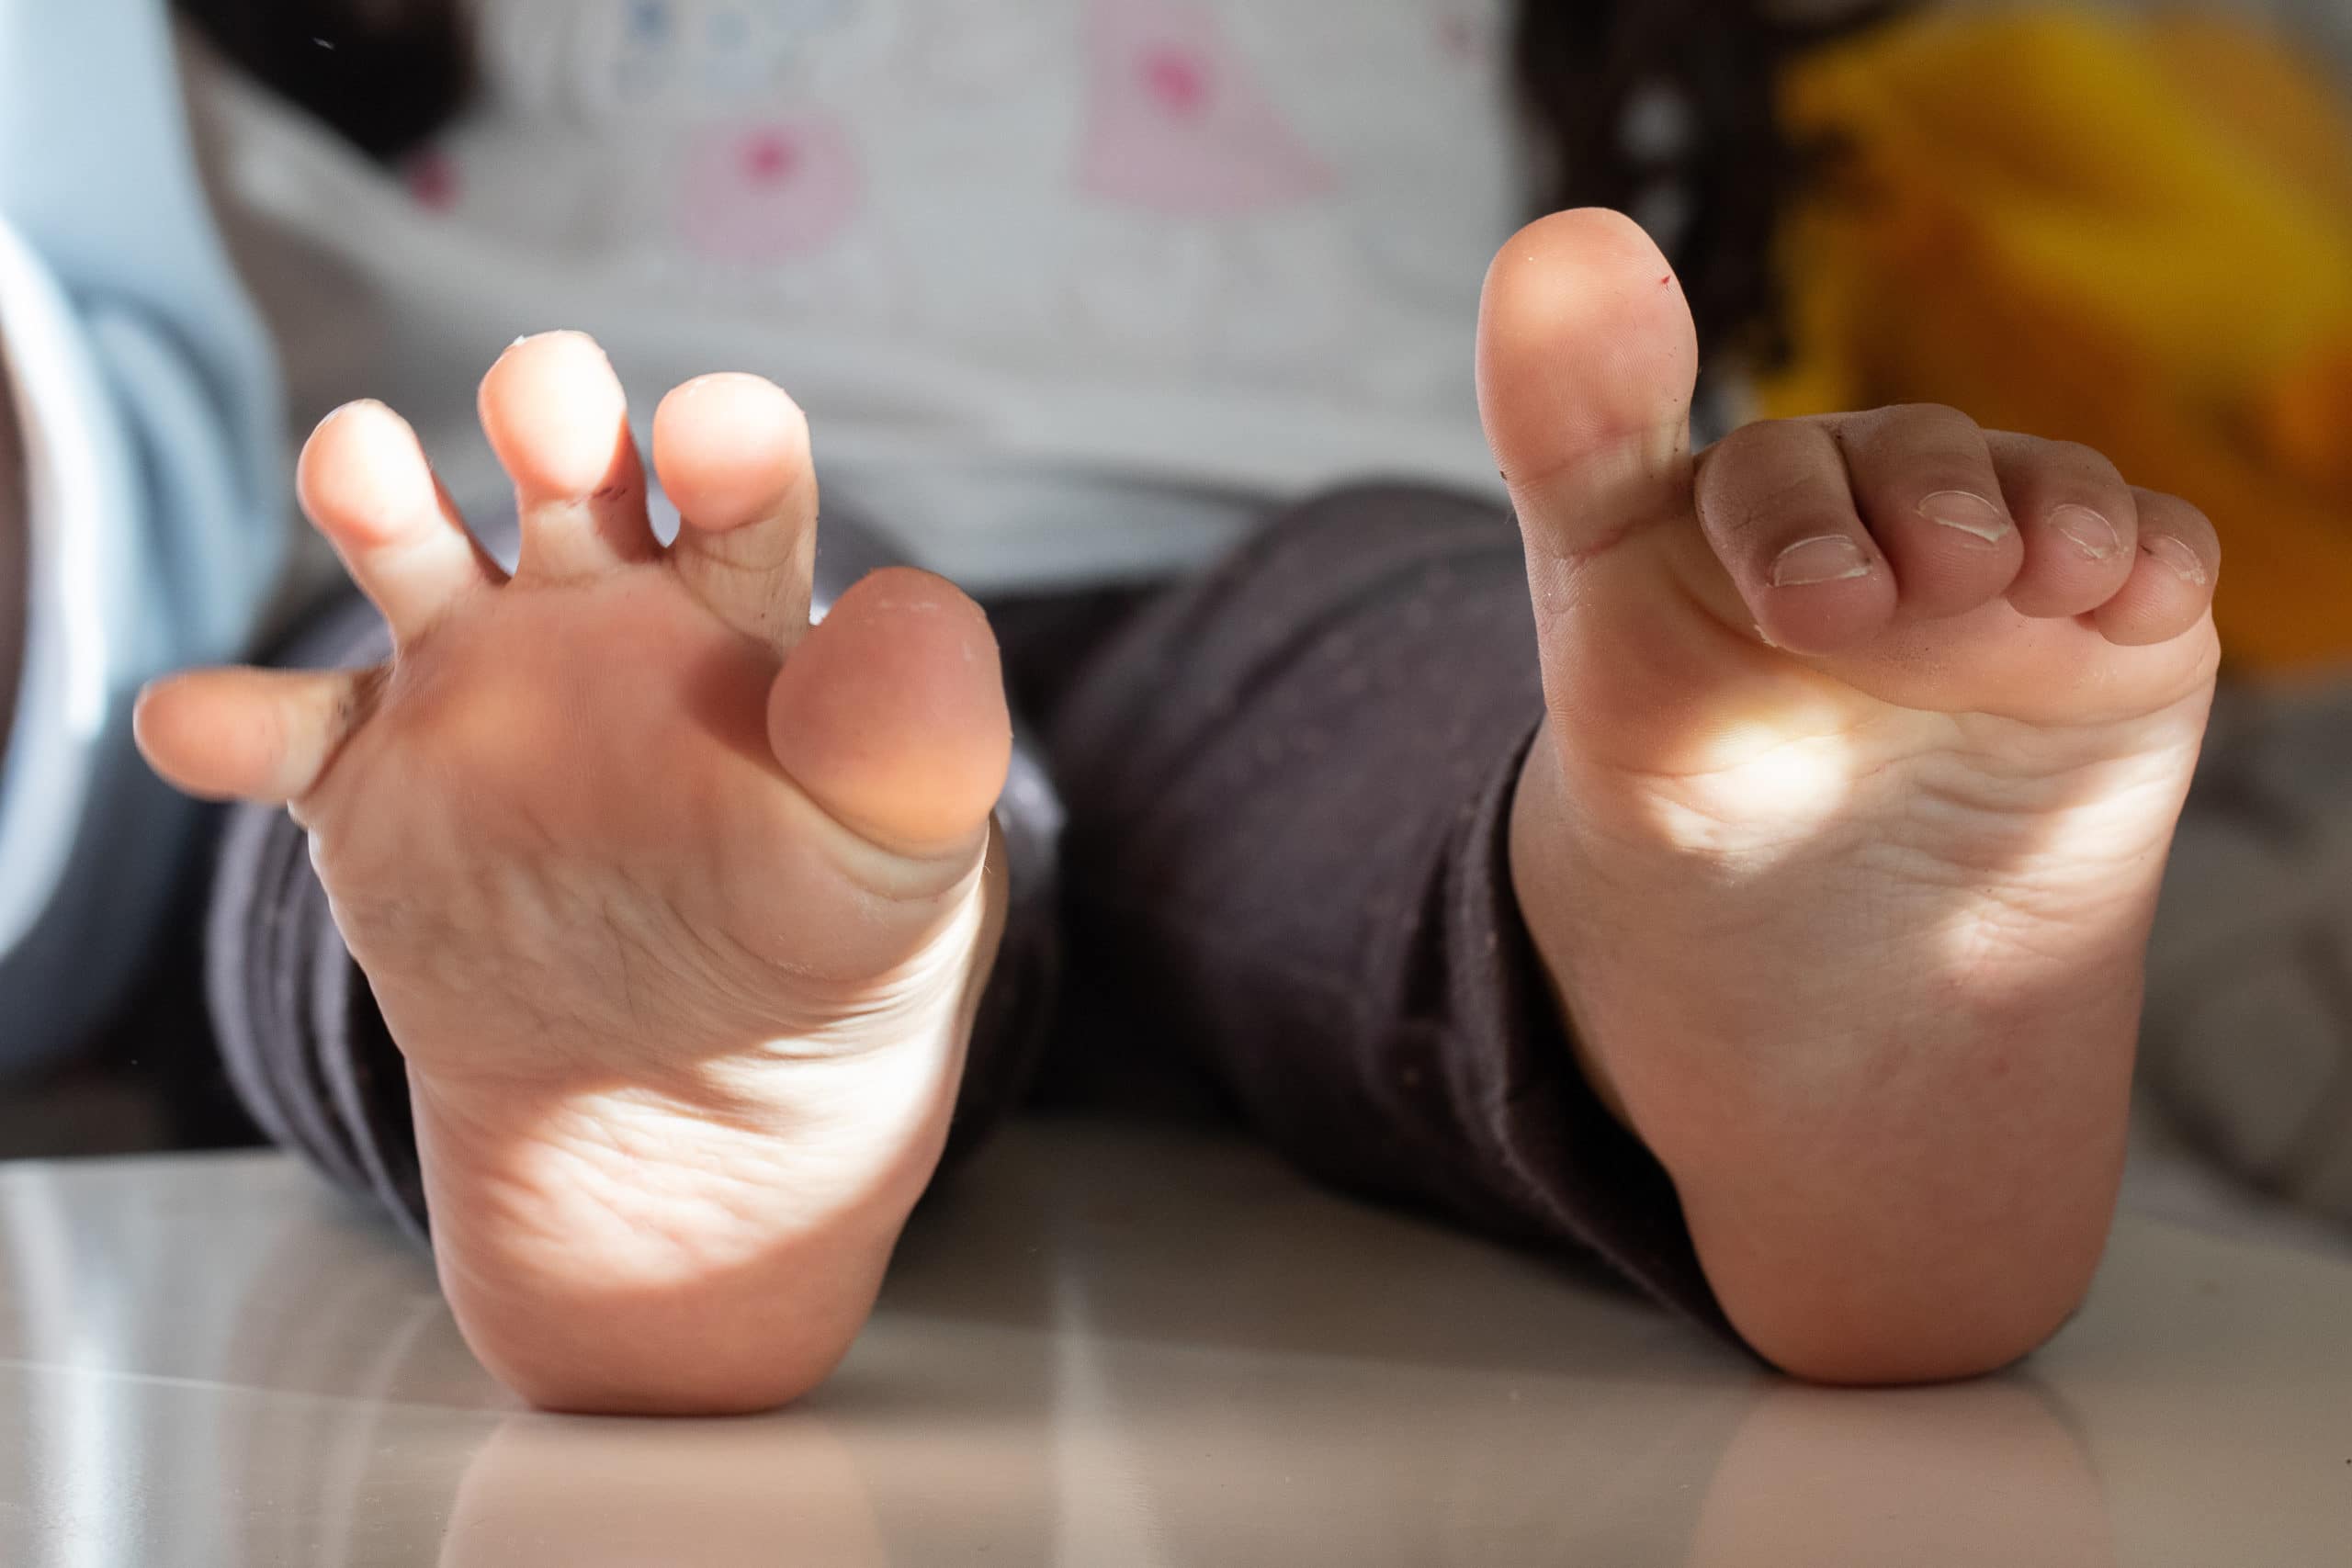 Big toe varism in the feet of a child